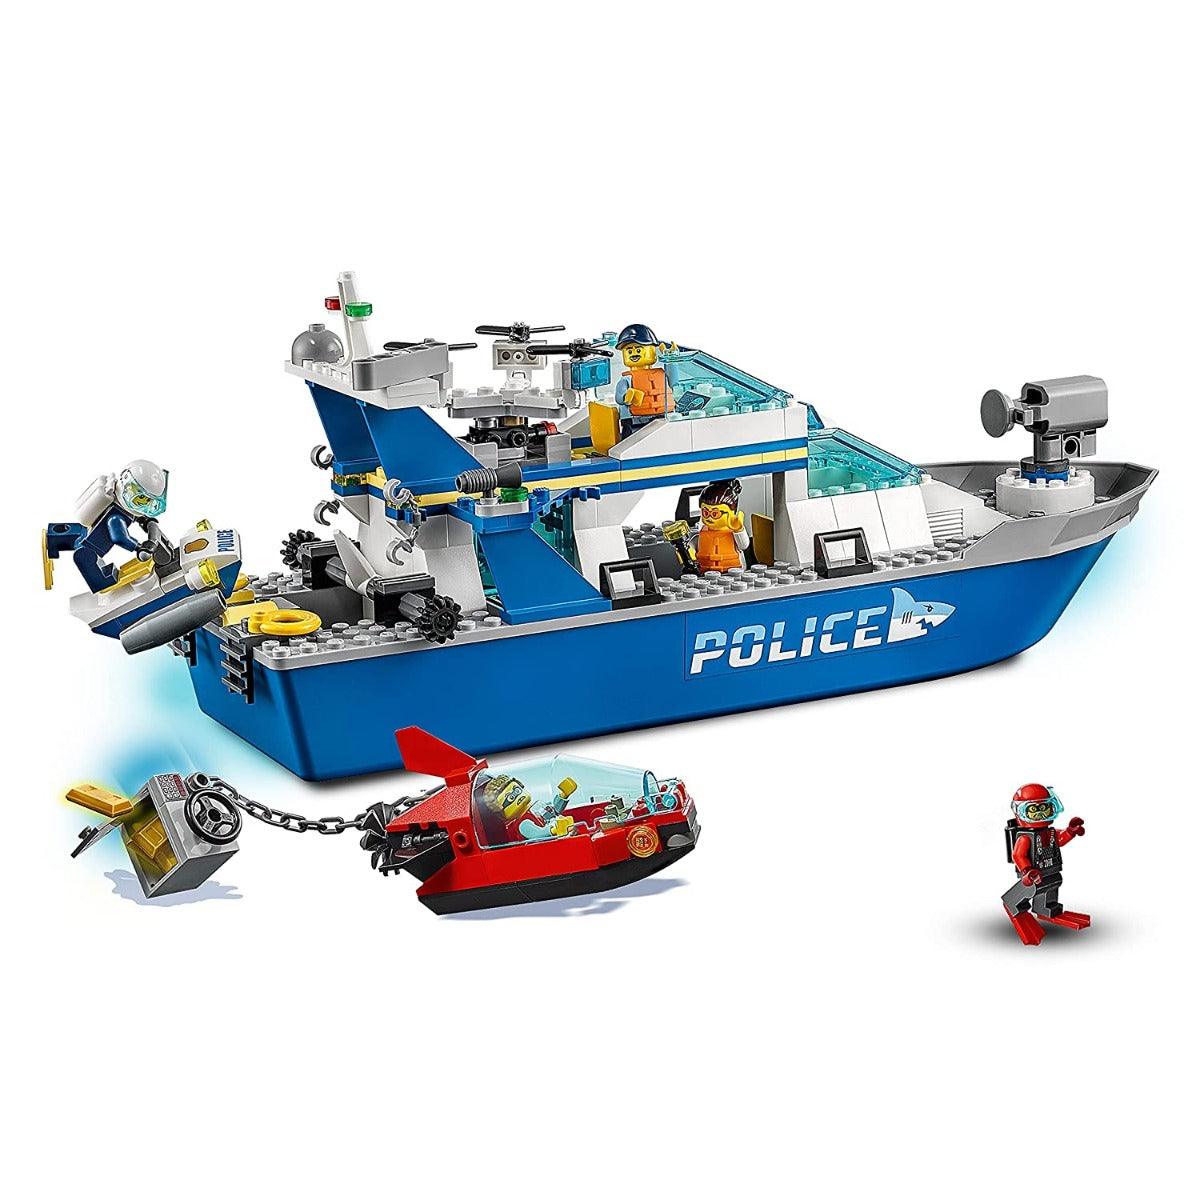 LEGO City Police Patrol Boat Building Kit for Ages 5+